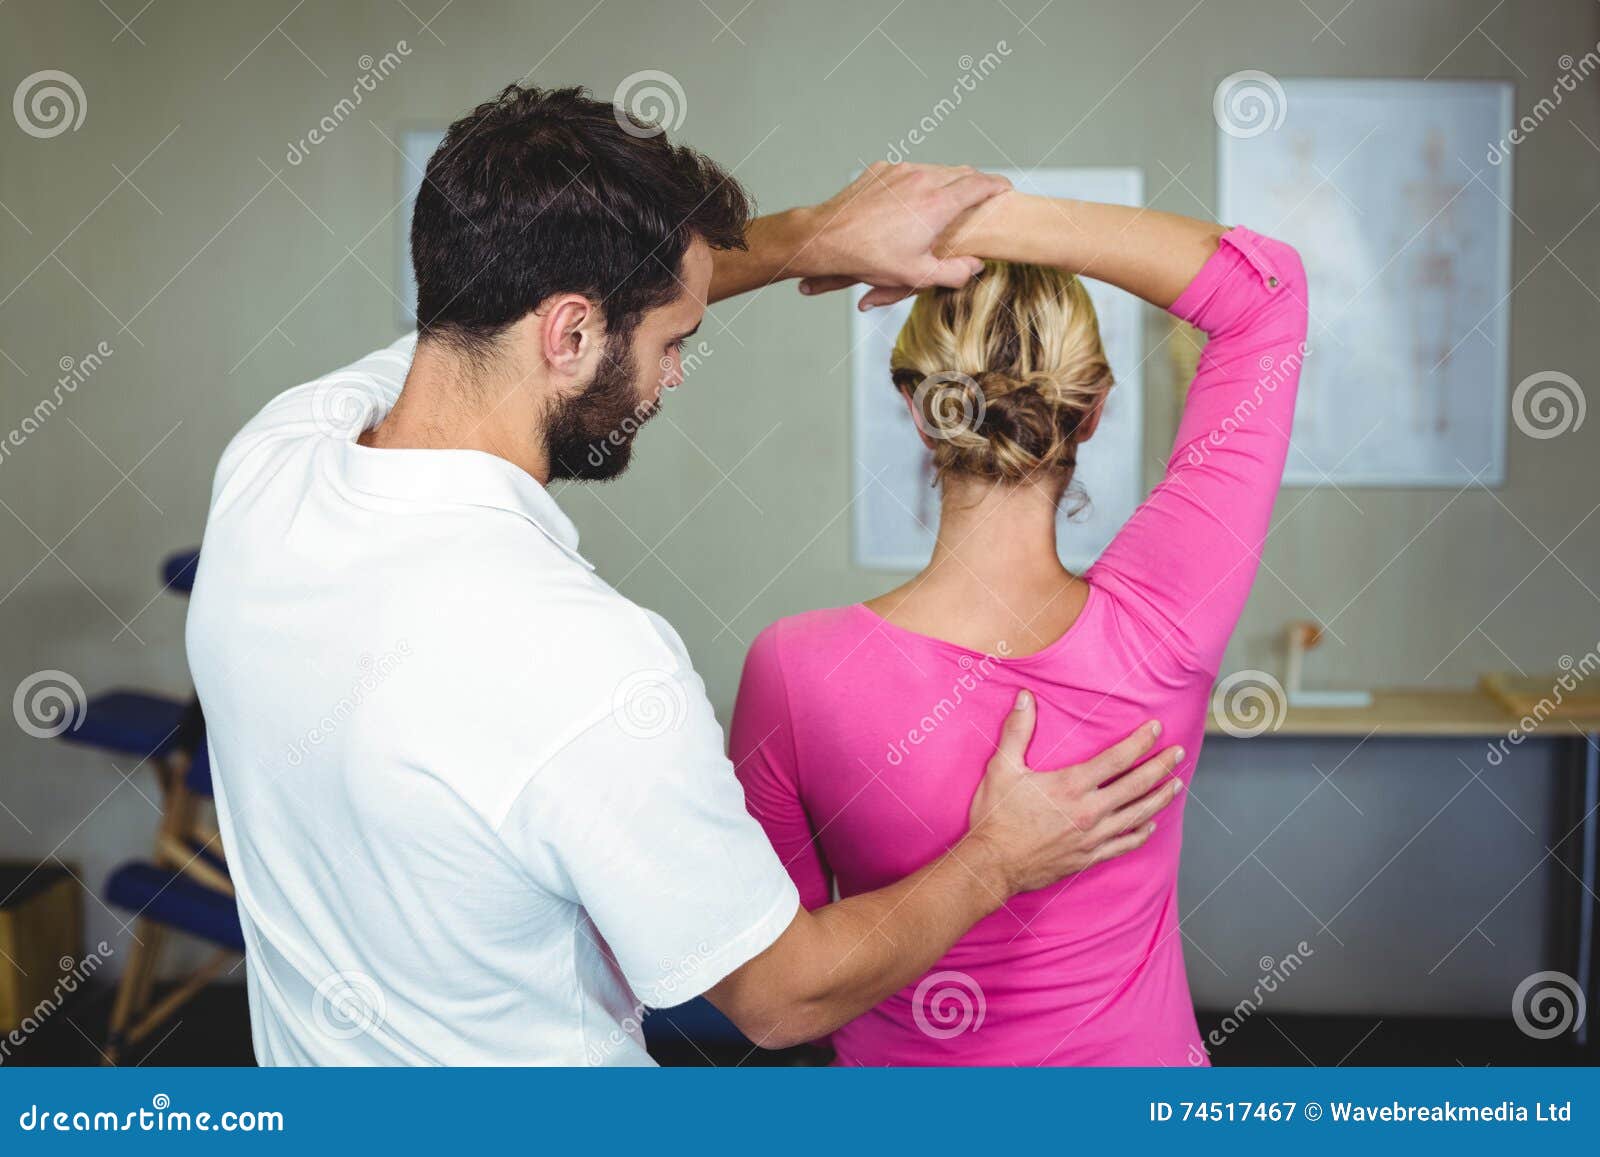 Male Physiotherapist Giving Arm Massage To Female Patient Stock Image